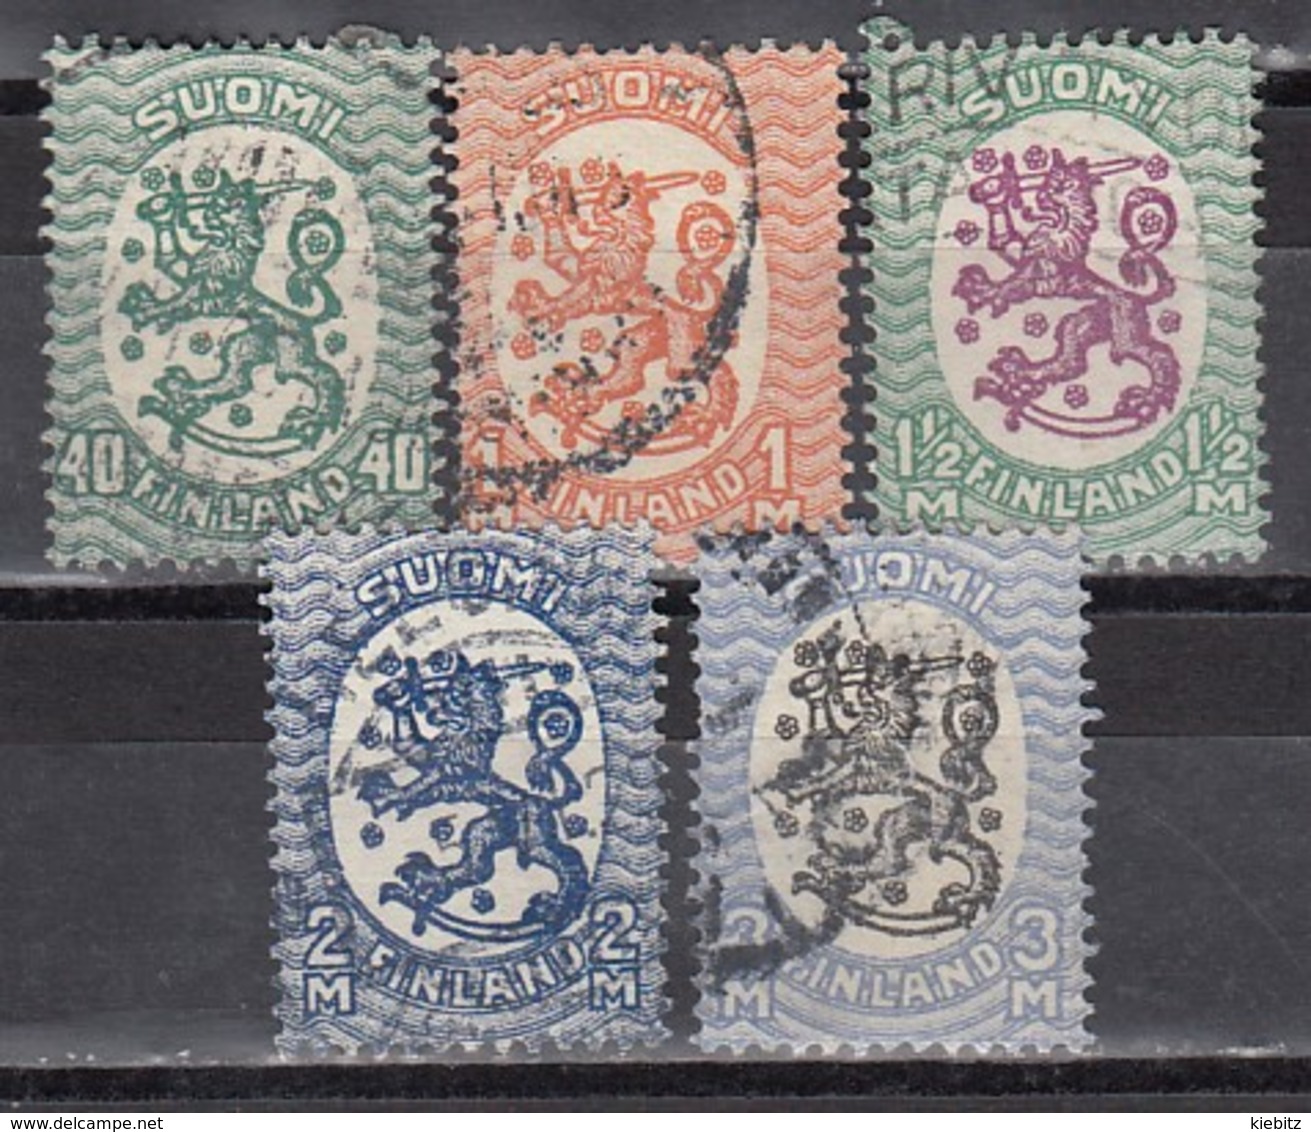 FINNLAND 1927  MiNr: 128-137  Lot 5x  Used - Used Stamps